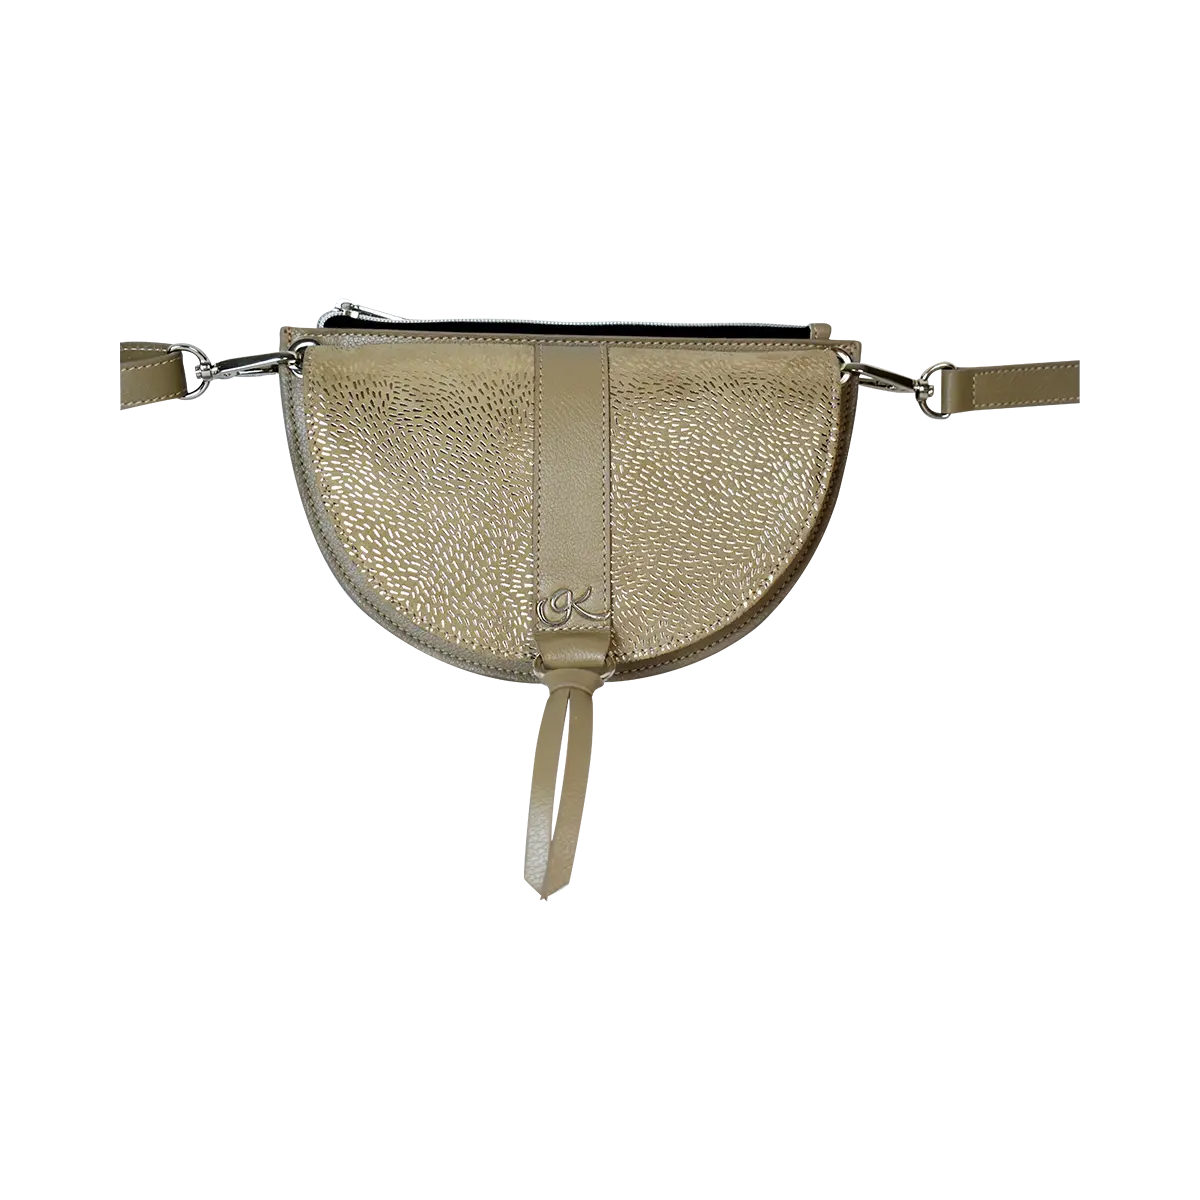 taupe stripe leather crossbody bag and fanny pack. Accessory for women in San Diego, CA.